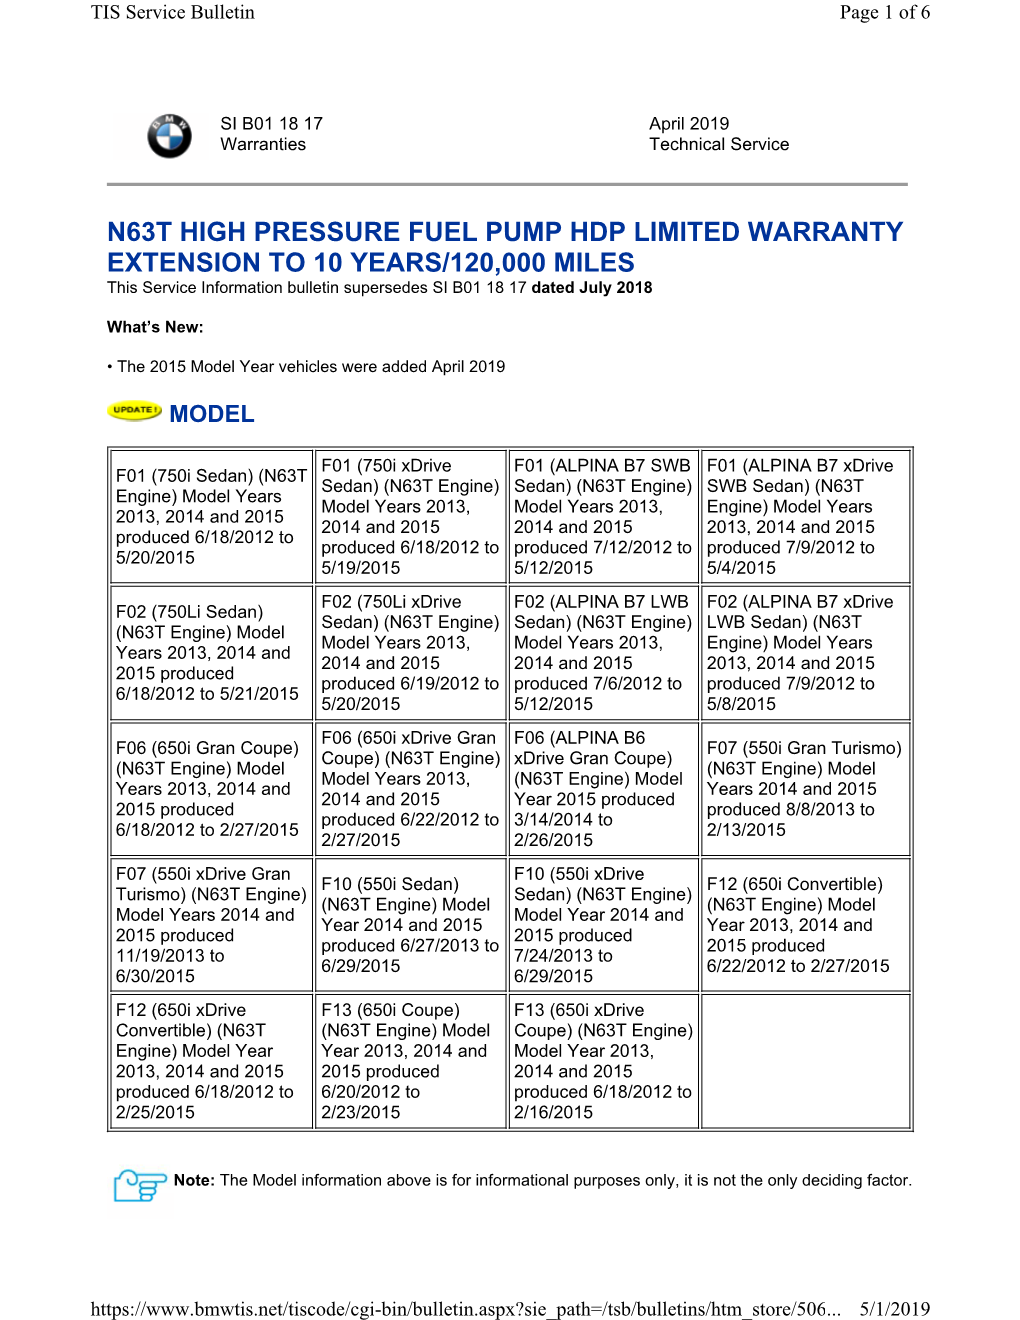 N63T HIGH PRESSURE FUEL PUMP HDP LIMITED WARRANTY EXTENSION to 10 YEARS/120,000 MILES This Service Information Bulletin Supersedes SI B01 18 17 Dated July 2018